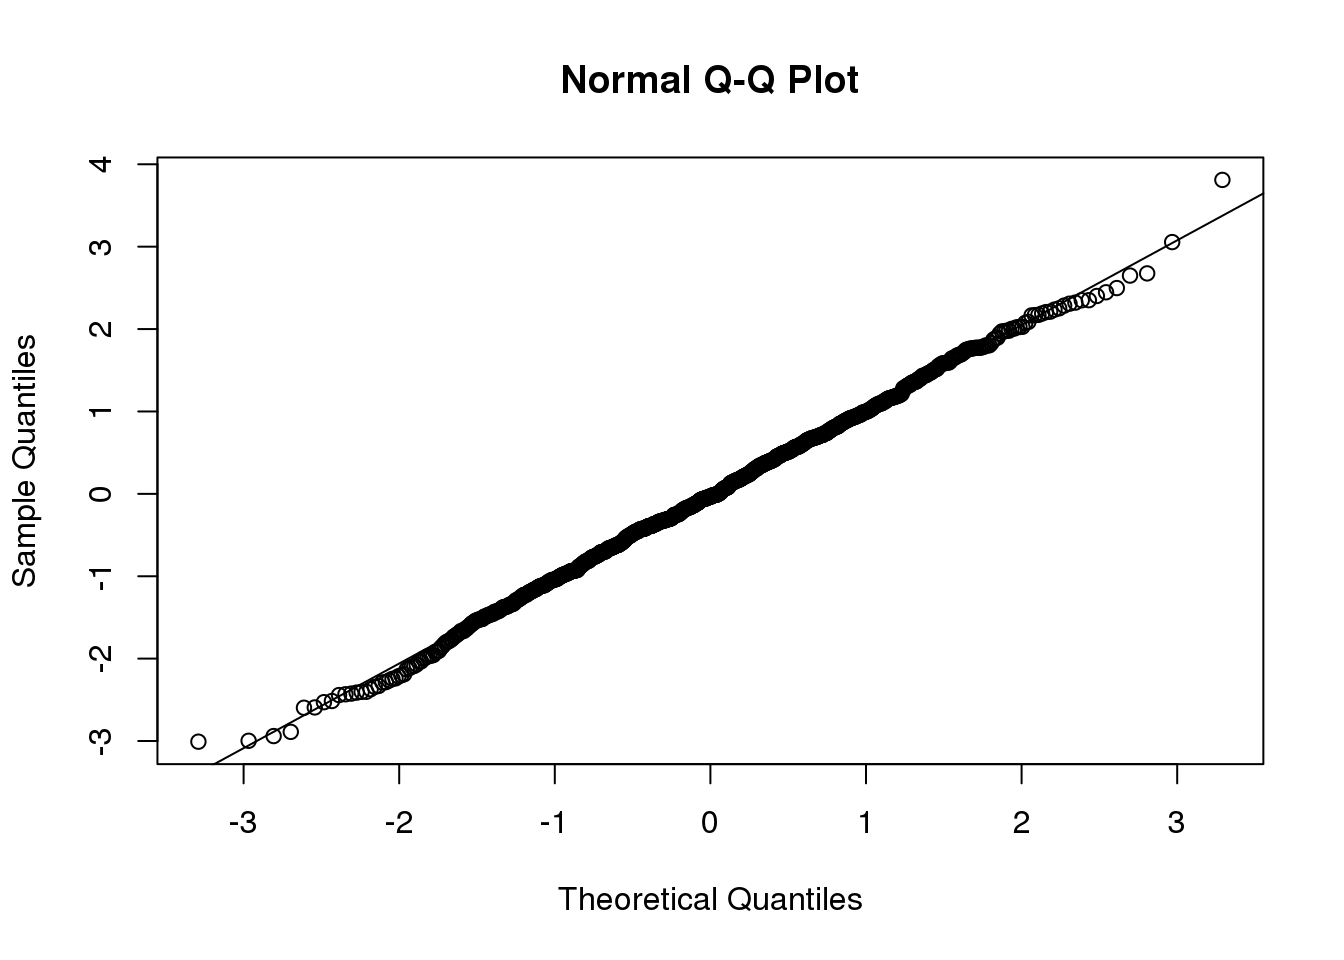 Example of the qqnorm function. Here we apply it to numbers generated to follow a normal distribution.